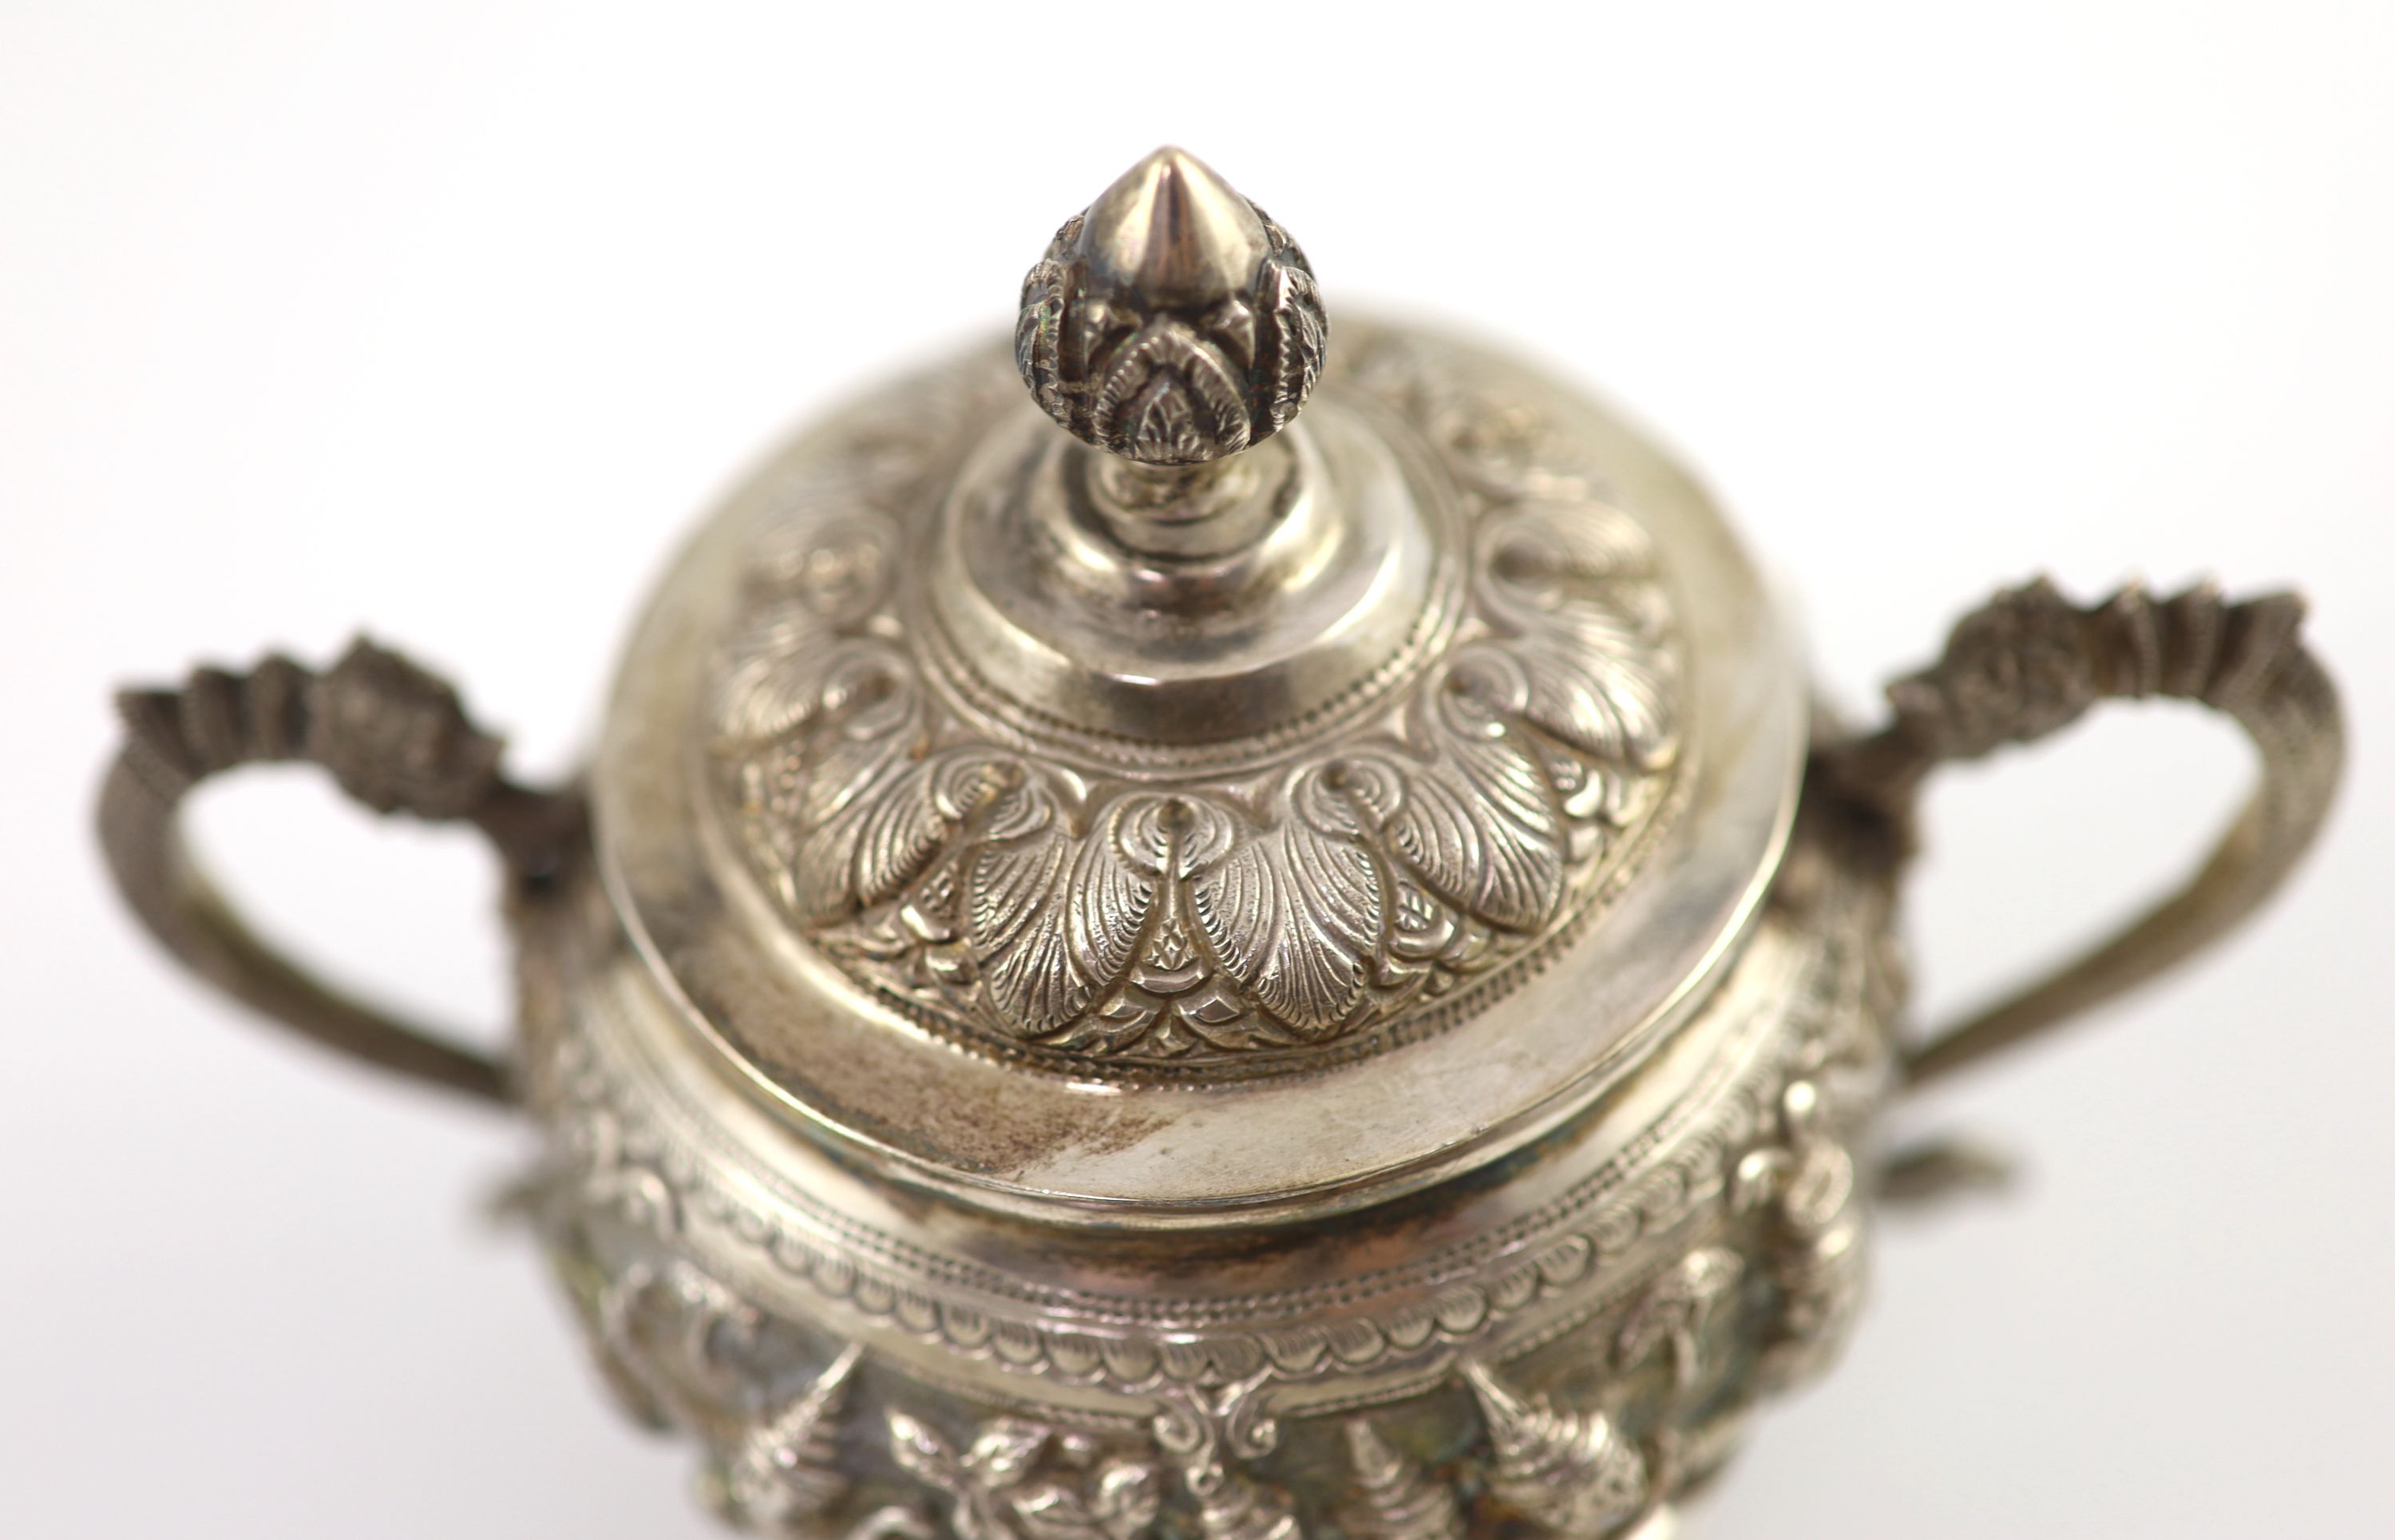 An impressive Burmese Sterling silver (950) three-piece tea service, with tray, cast with figures, teapot with cockerel spout and figural handle